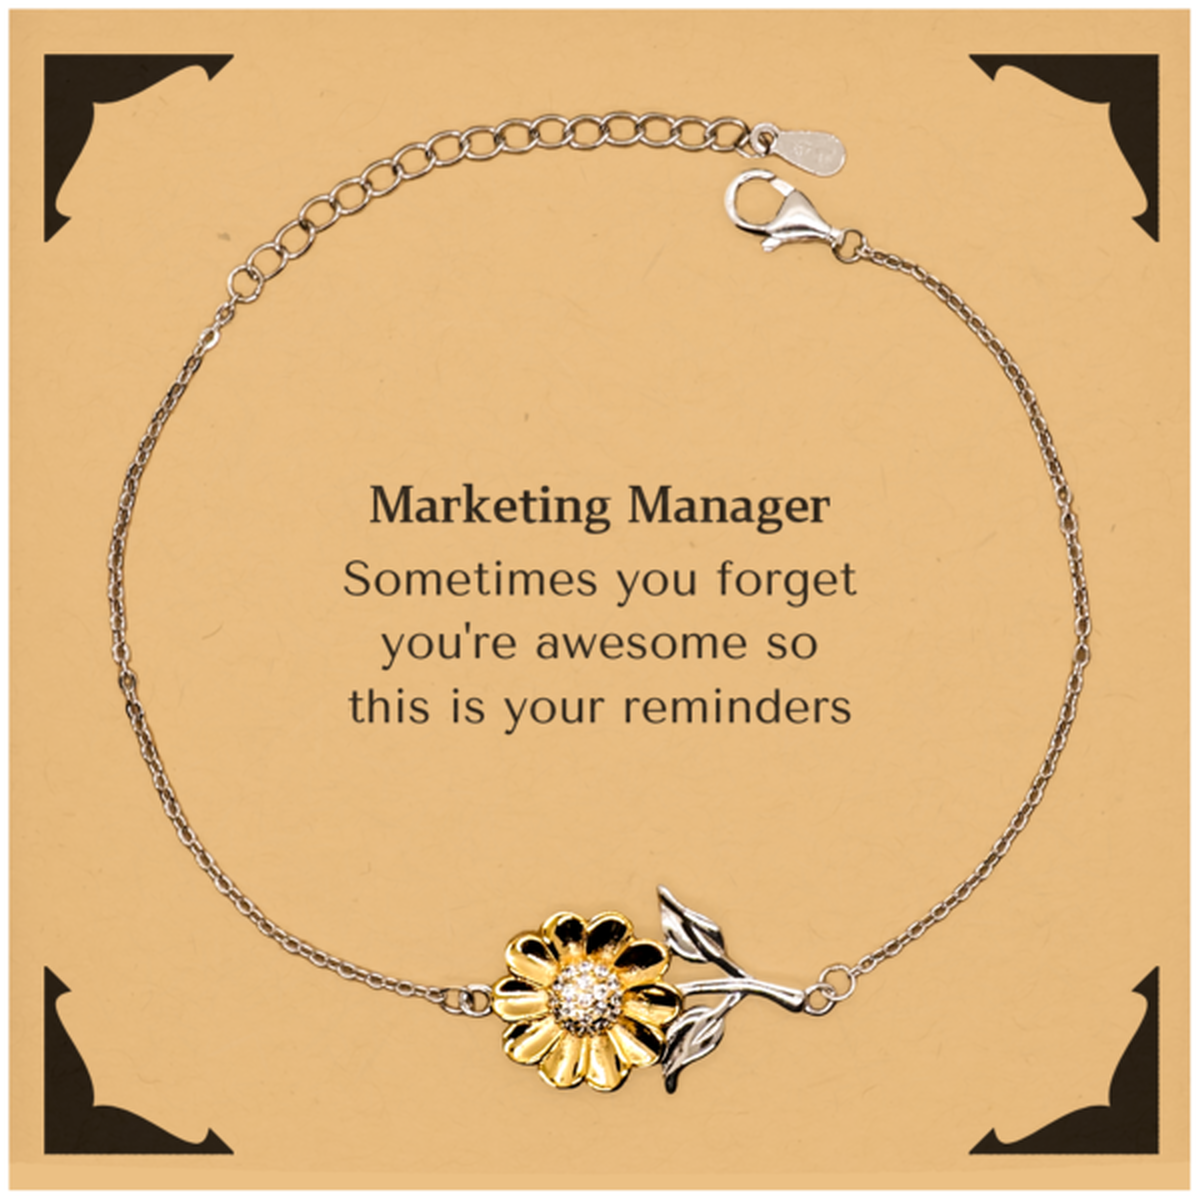 Sentimental Marketing Manager Sunflower Bracelet, Marketing Manager Sometimes you forget you're awesome so this is your reminders, Graduation Christmas Birthday Gifts for Marketing Manager, Men, Women, Coworkers